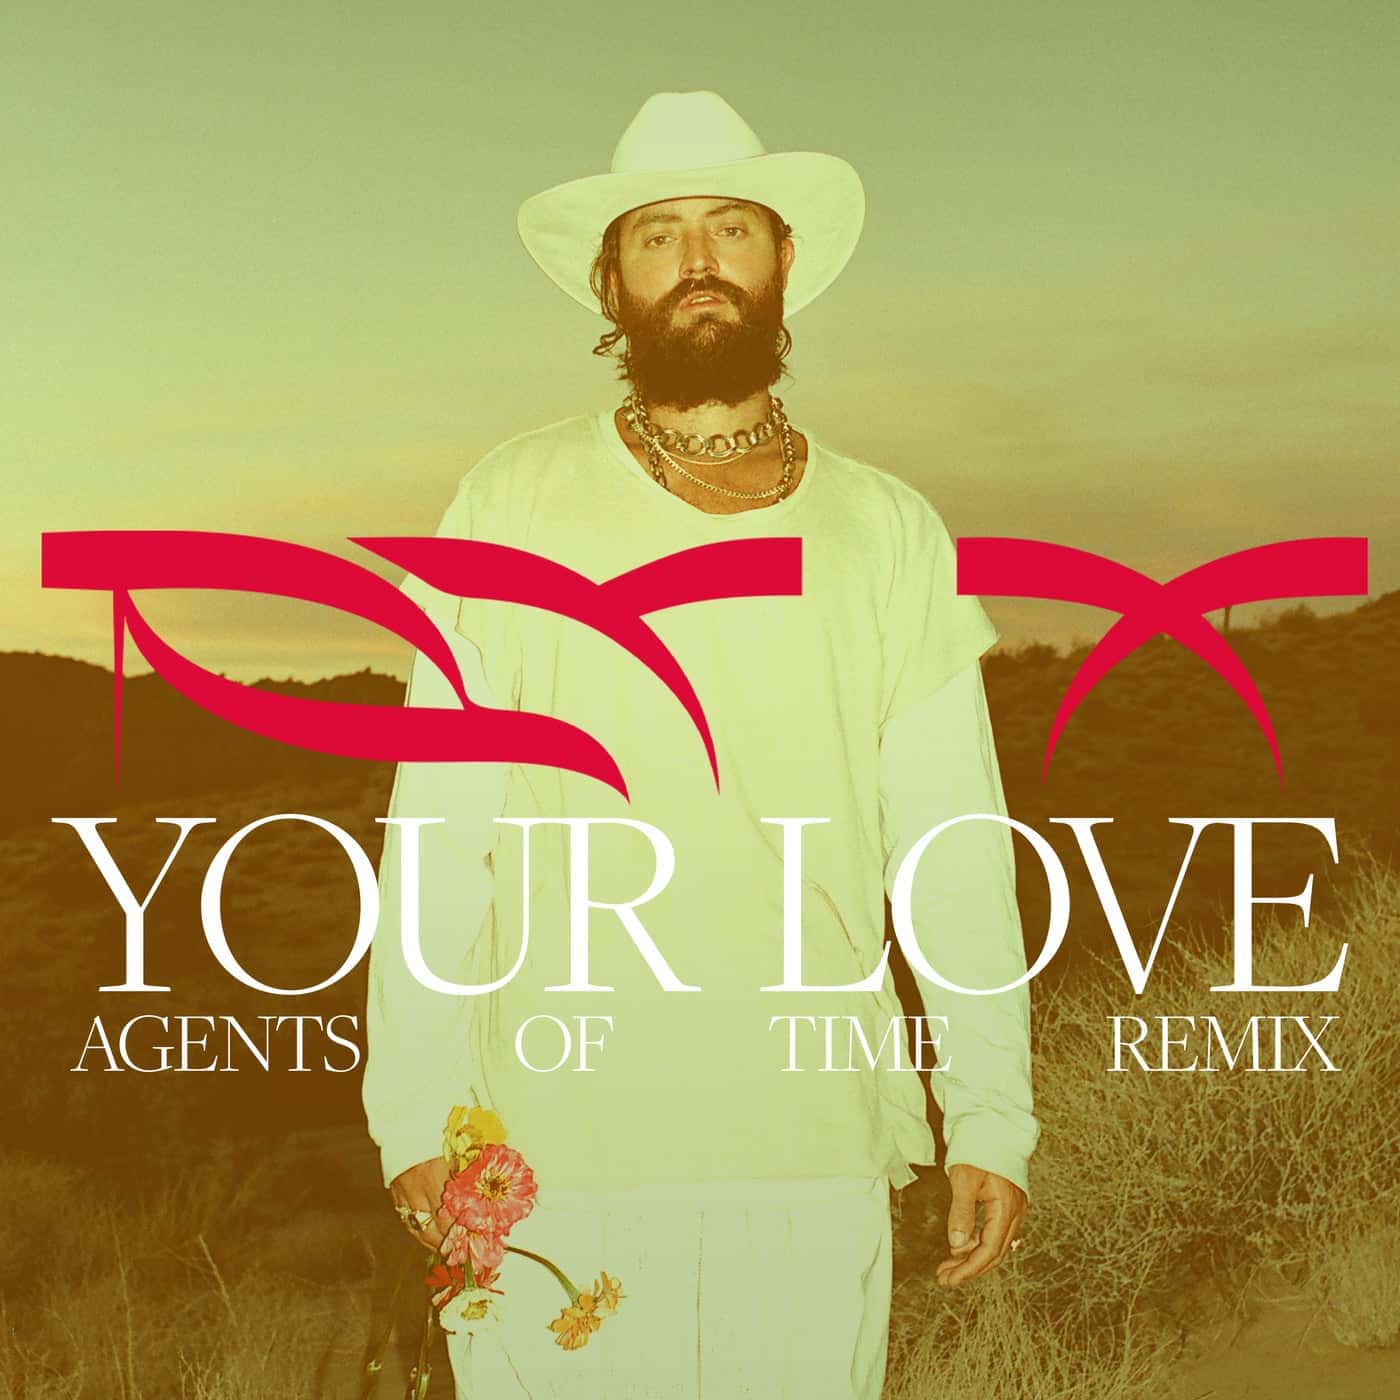 Download RY X - Your Love (Agents of Time Remix) on Electrobuzz